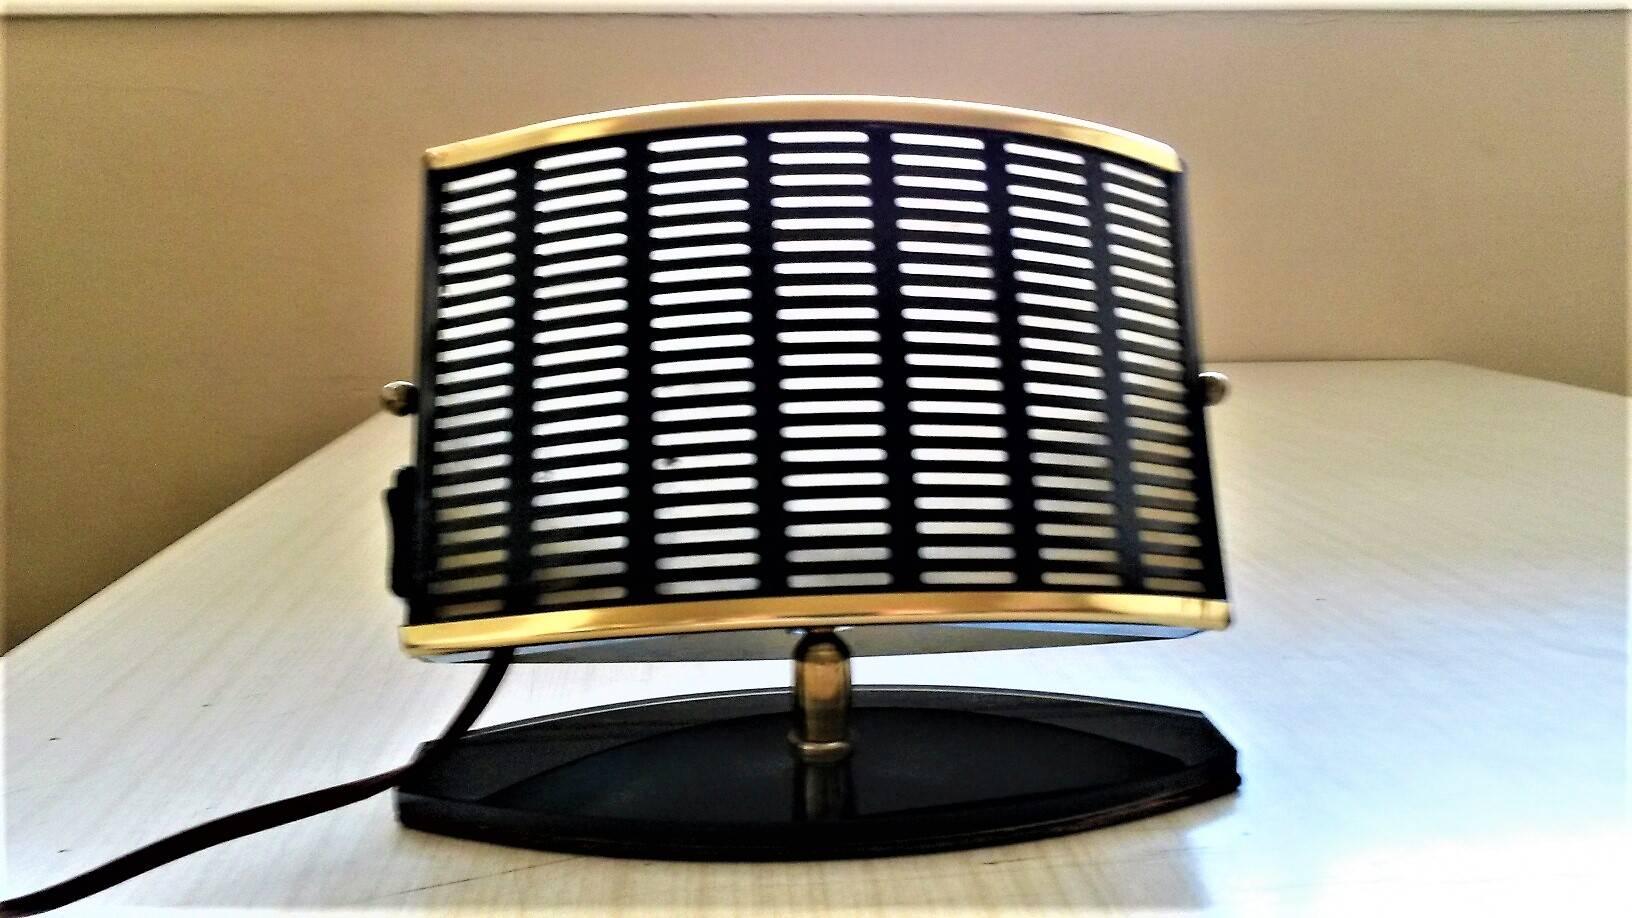 Pair of French Mid-Century Modern table side lamps.
Made in perforated Black sheet metal and gilt metal on a black opaline glass base. One in white lacquer and the other in black lacquer inside decoration. By Aluminor, in the style of Jacques Biny,